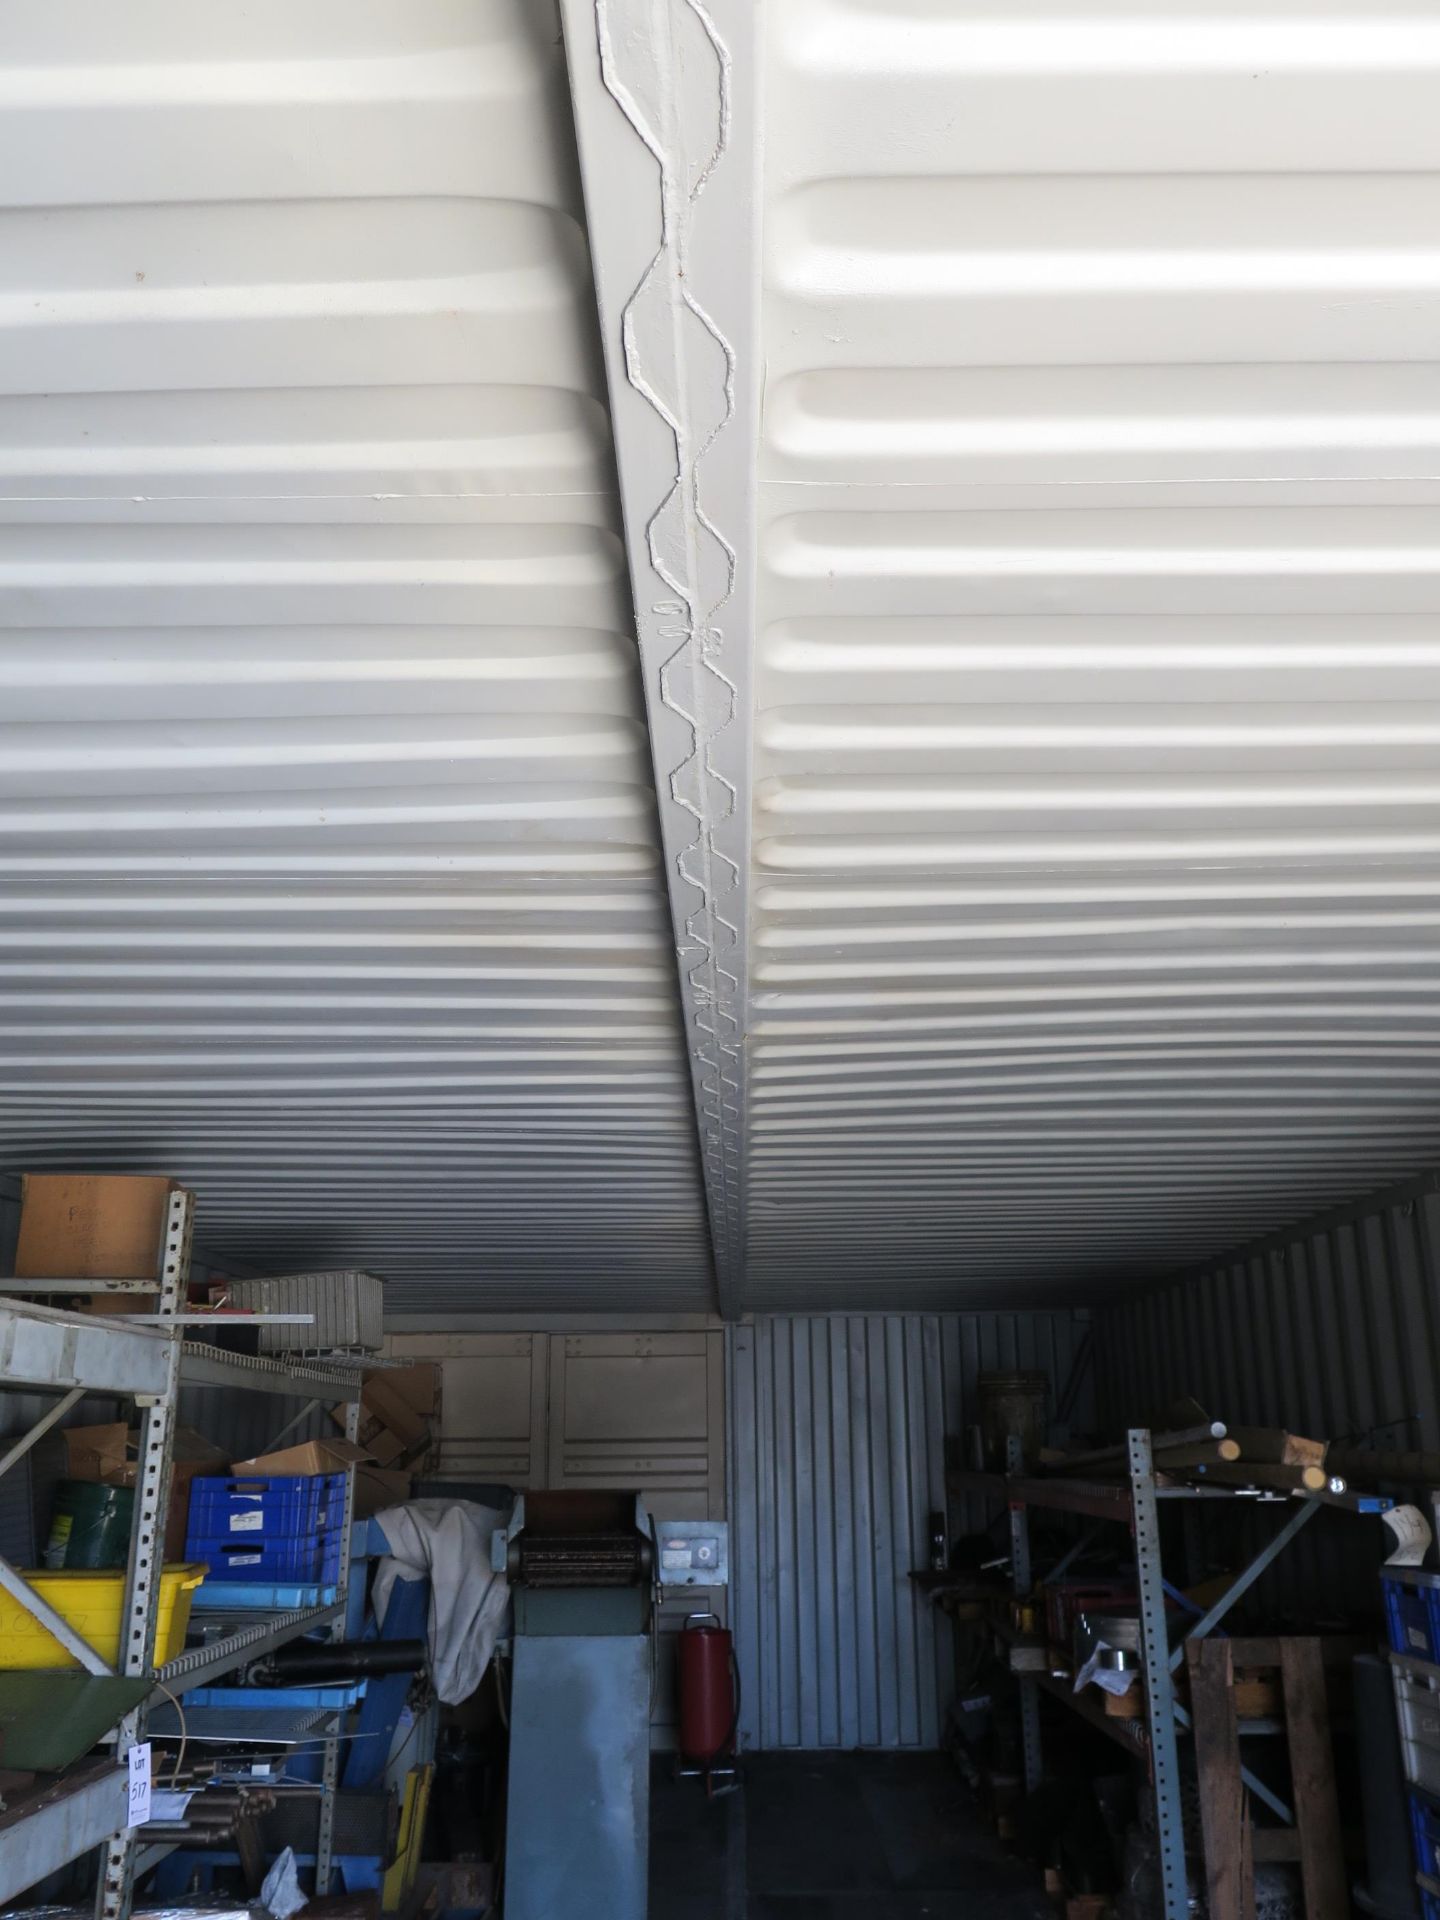 40' DOUBLE-WIDE STORAGE CONTAINER (WELDED TOGATHER) - Image 3 of 4